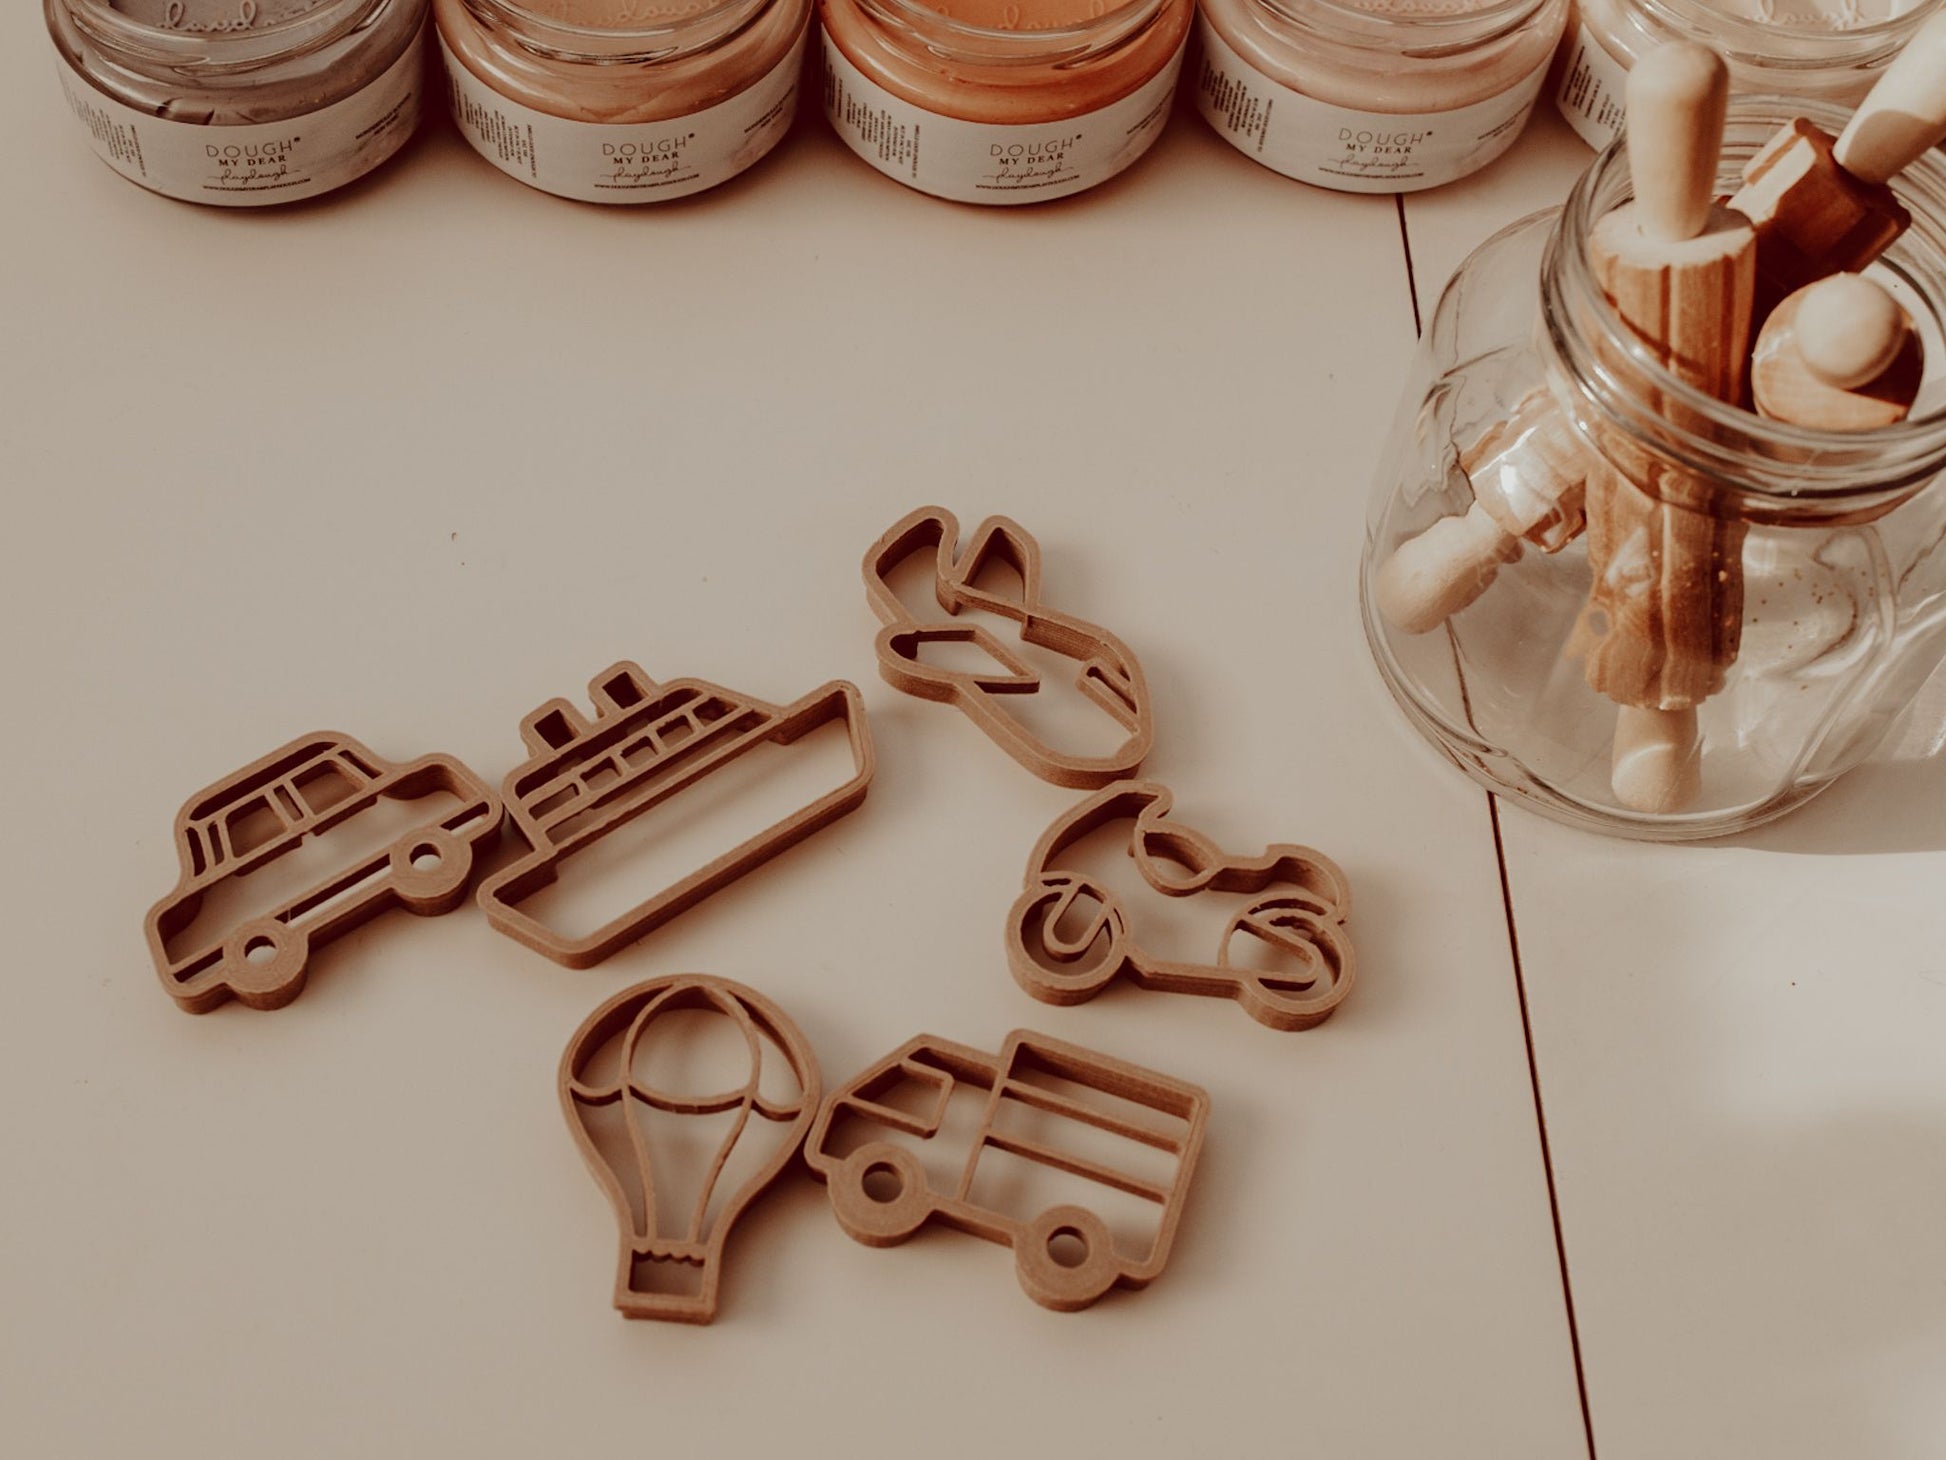 Kinfolk Pantry eco playdough cutters - a set of 6 transport themed biodegradable cutters for kids arts and crafts. Shapes include a boat, plane, car, hot air balloon, motorbike and truck.